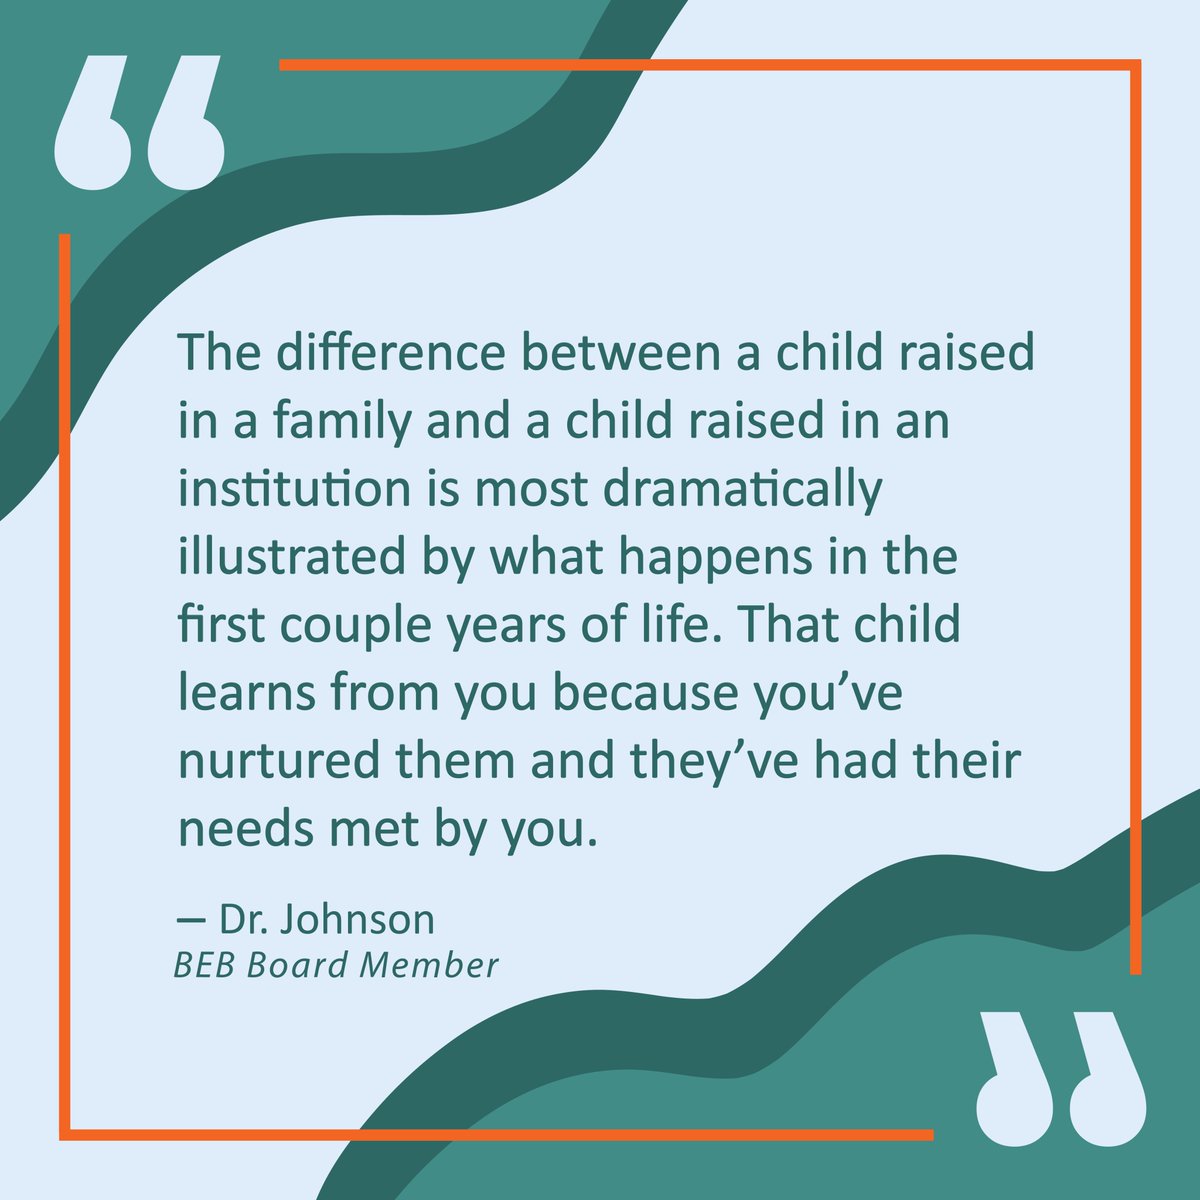 Dr. Johnson is a Professor of Pediatrics and a member of the Divisions of Neonatology and Global Pediatrics at the University of Minnesota and serves as one of the Board Members for BEB. We are thankful to have Dr. Johnson as part of the BEB team!